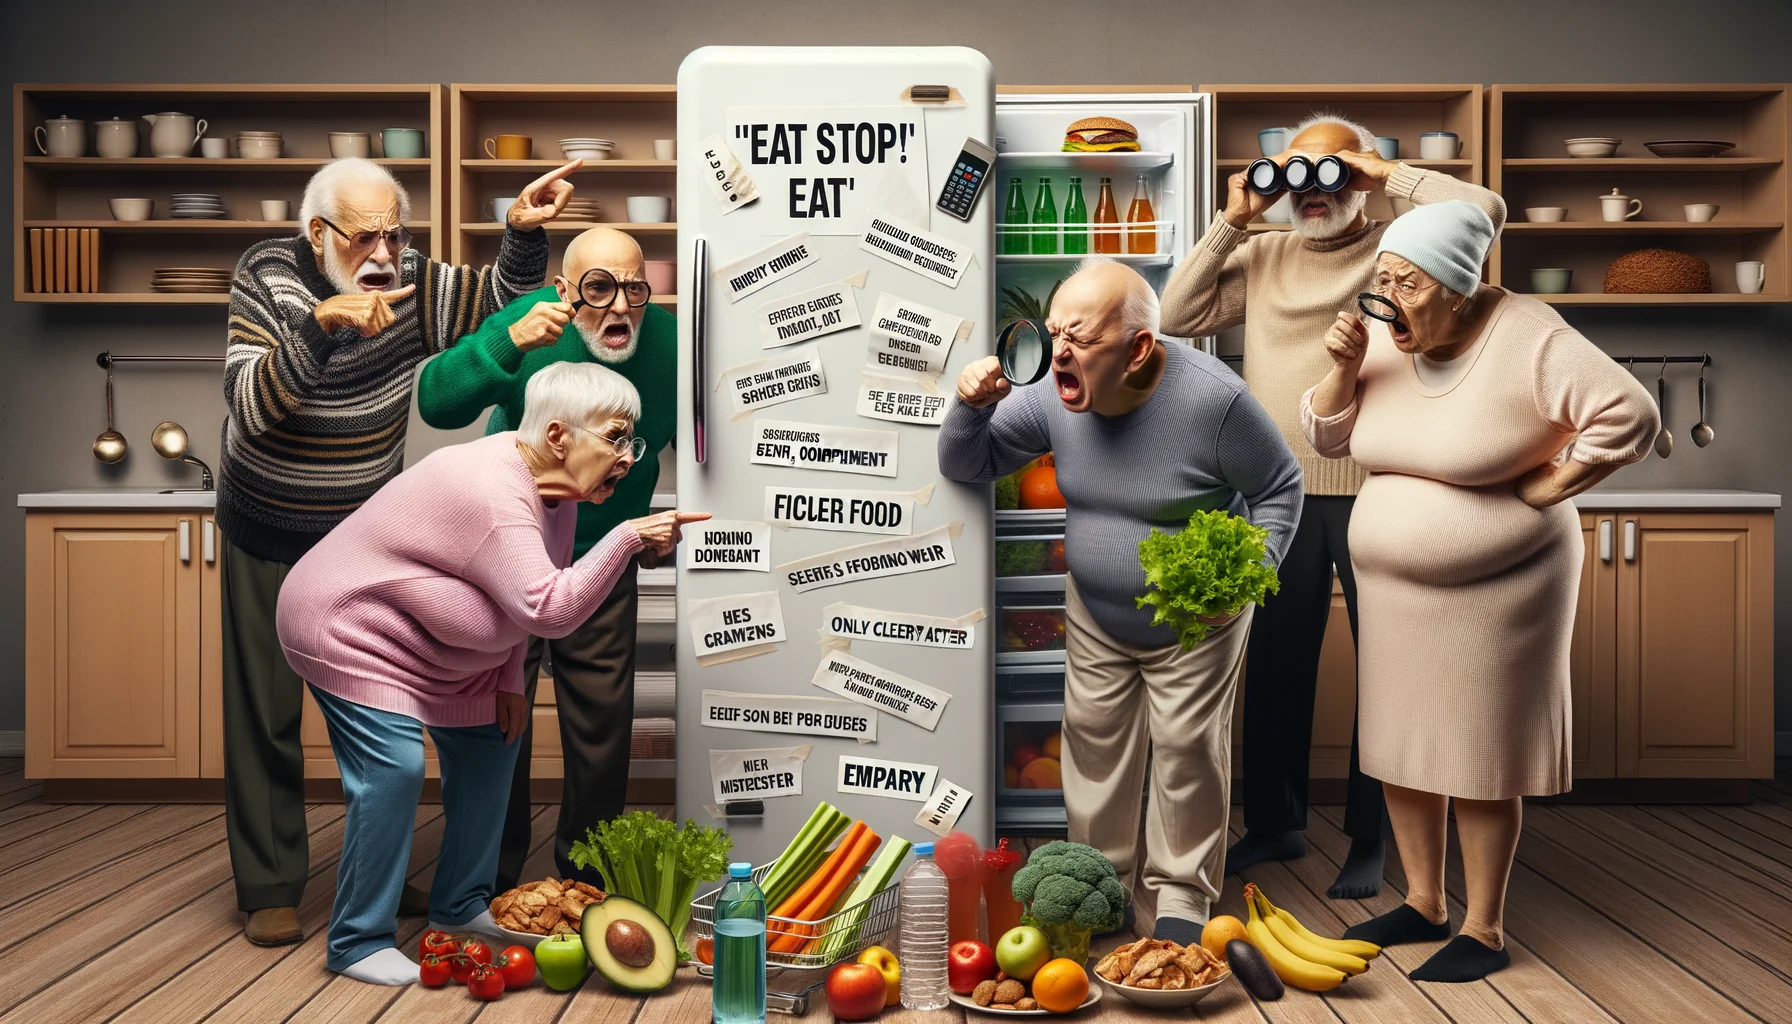 Show a high resolution humorous image in an everyday setting where senior citizens of various descents: Caucasian, Hispanic, Black, and Middle-Eastern, are humorously demonstrating their complaints with an 'Eat Stop Eat' diet. Please include funny details like an overly complicated diet chart, senior individuals trying to decipher tiny food labels with oversized magnifying glasses, and perhaps, a person holding an 'empty' refrigerator door with only celery and water inside. The individuals may be expressive, showing a mix of frustration, confusion, and humor.